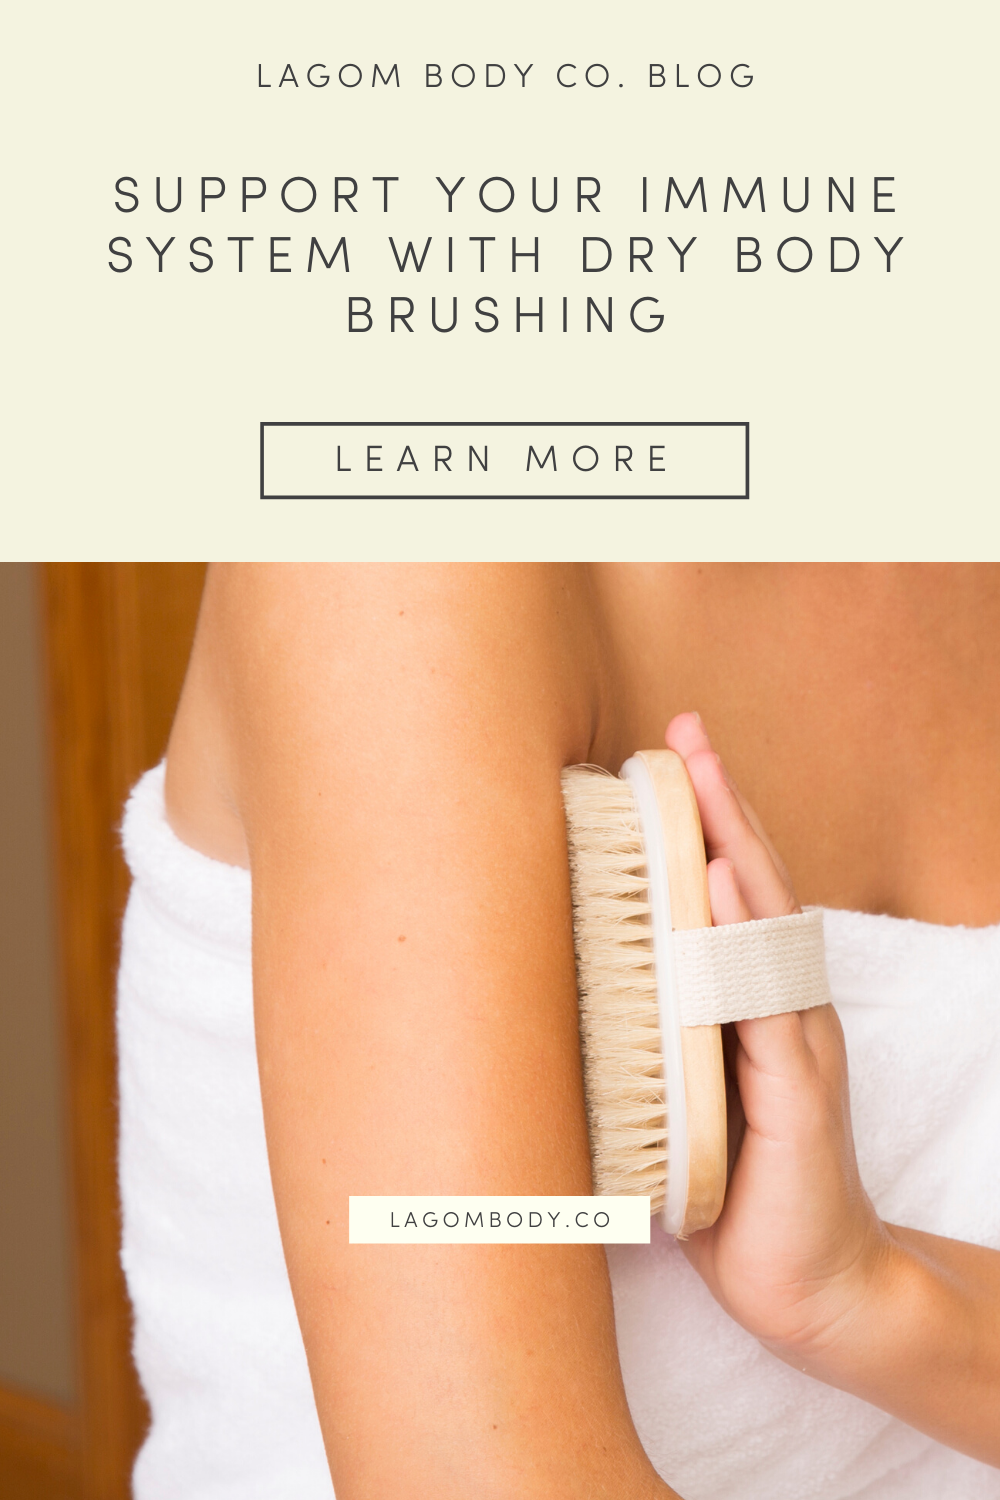 Support Your Immune System with Dry Body Brushing by Lagom Body Co. Pinterest Promo 